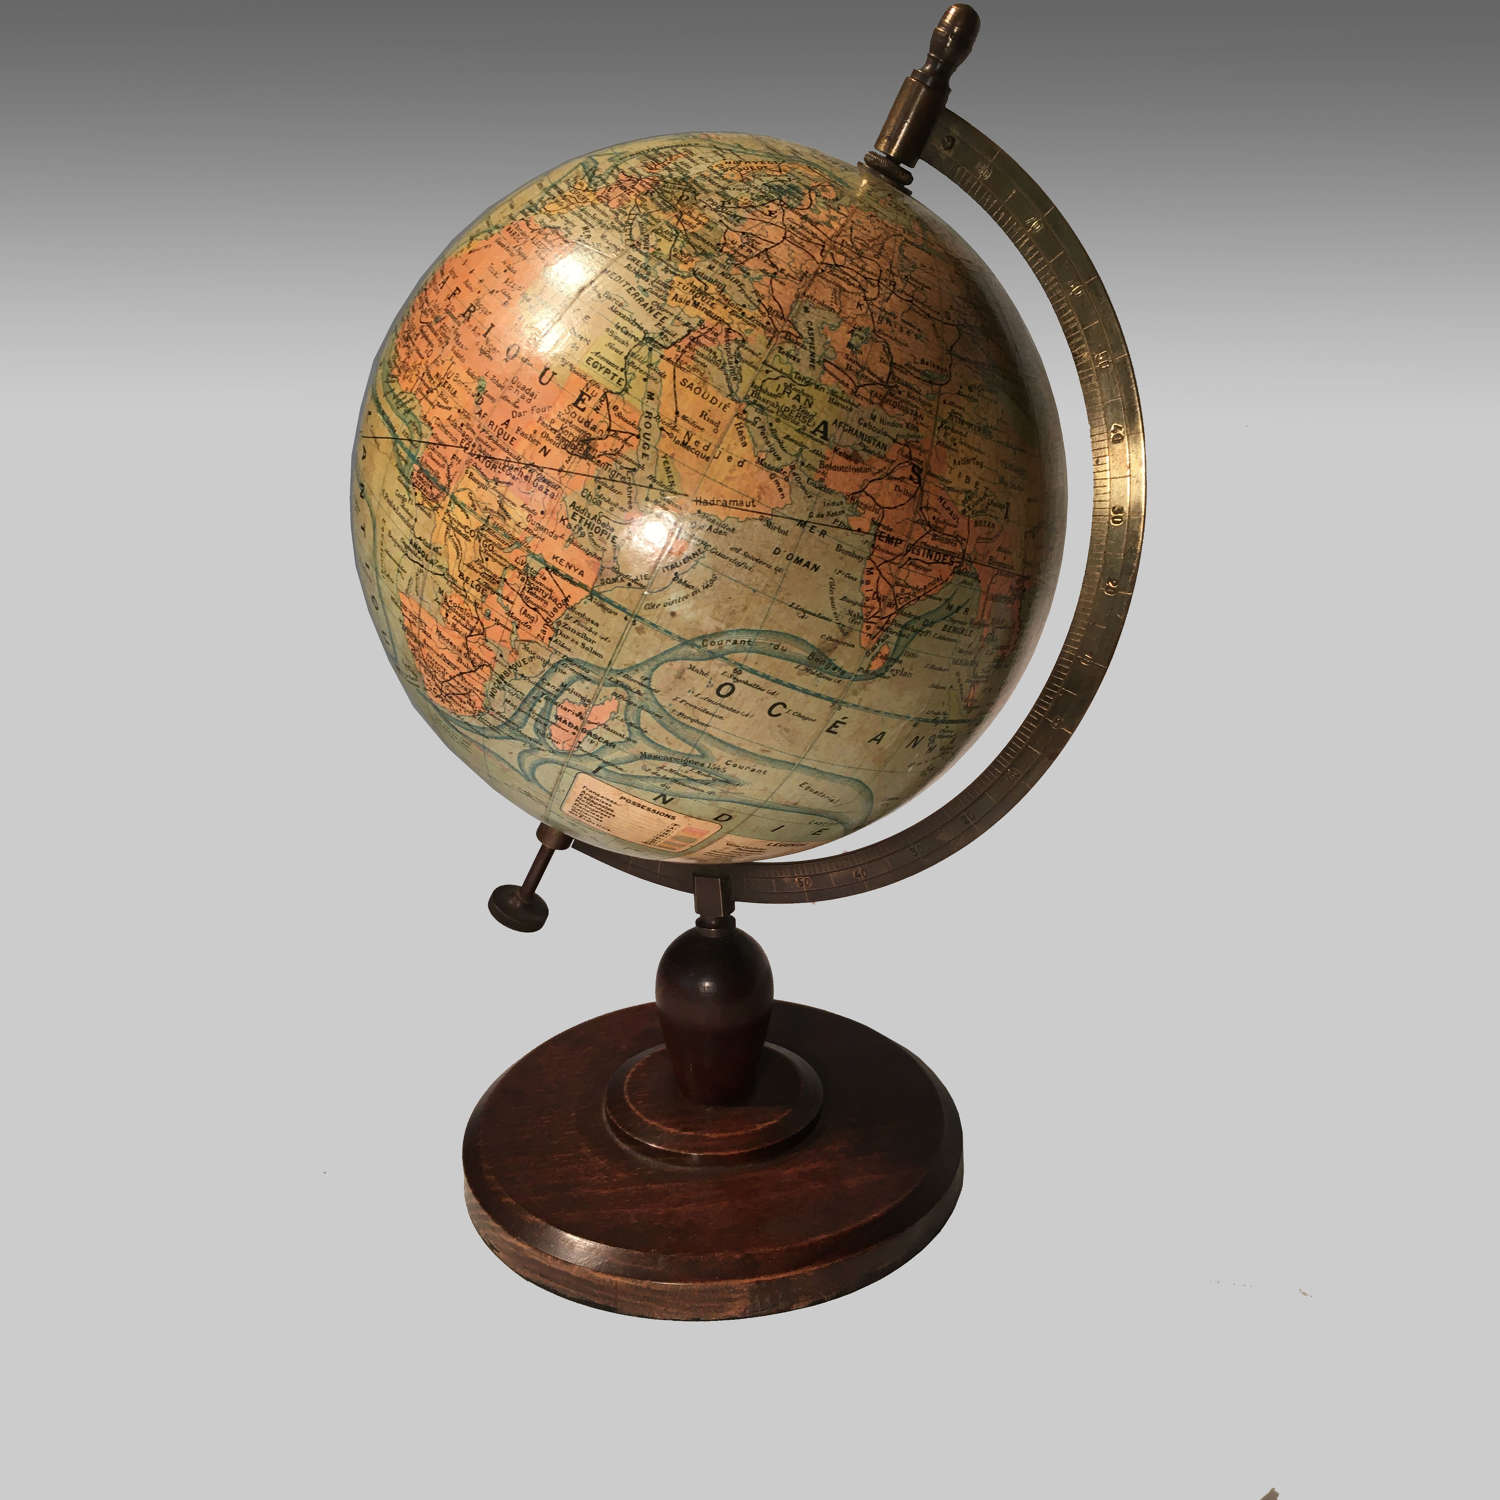 French ‘Globe Terrestre’ by J.Forest